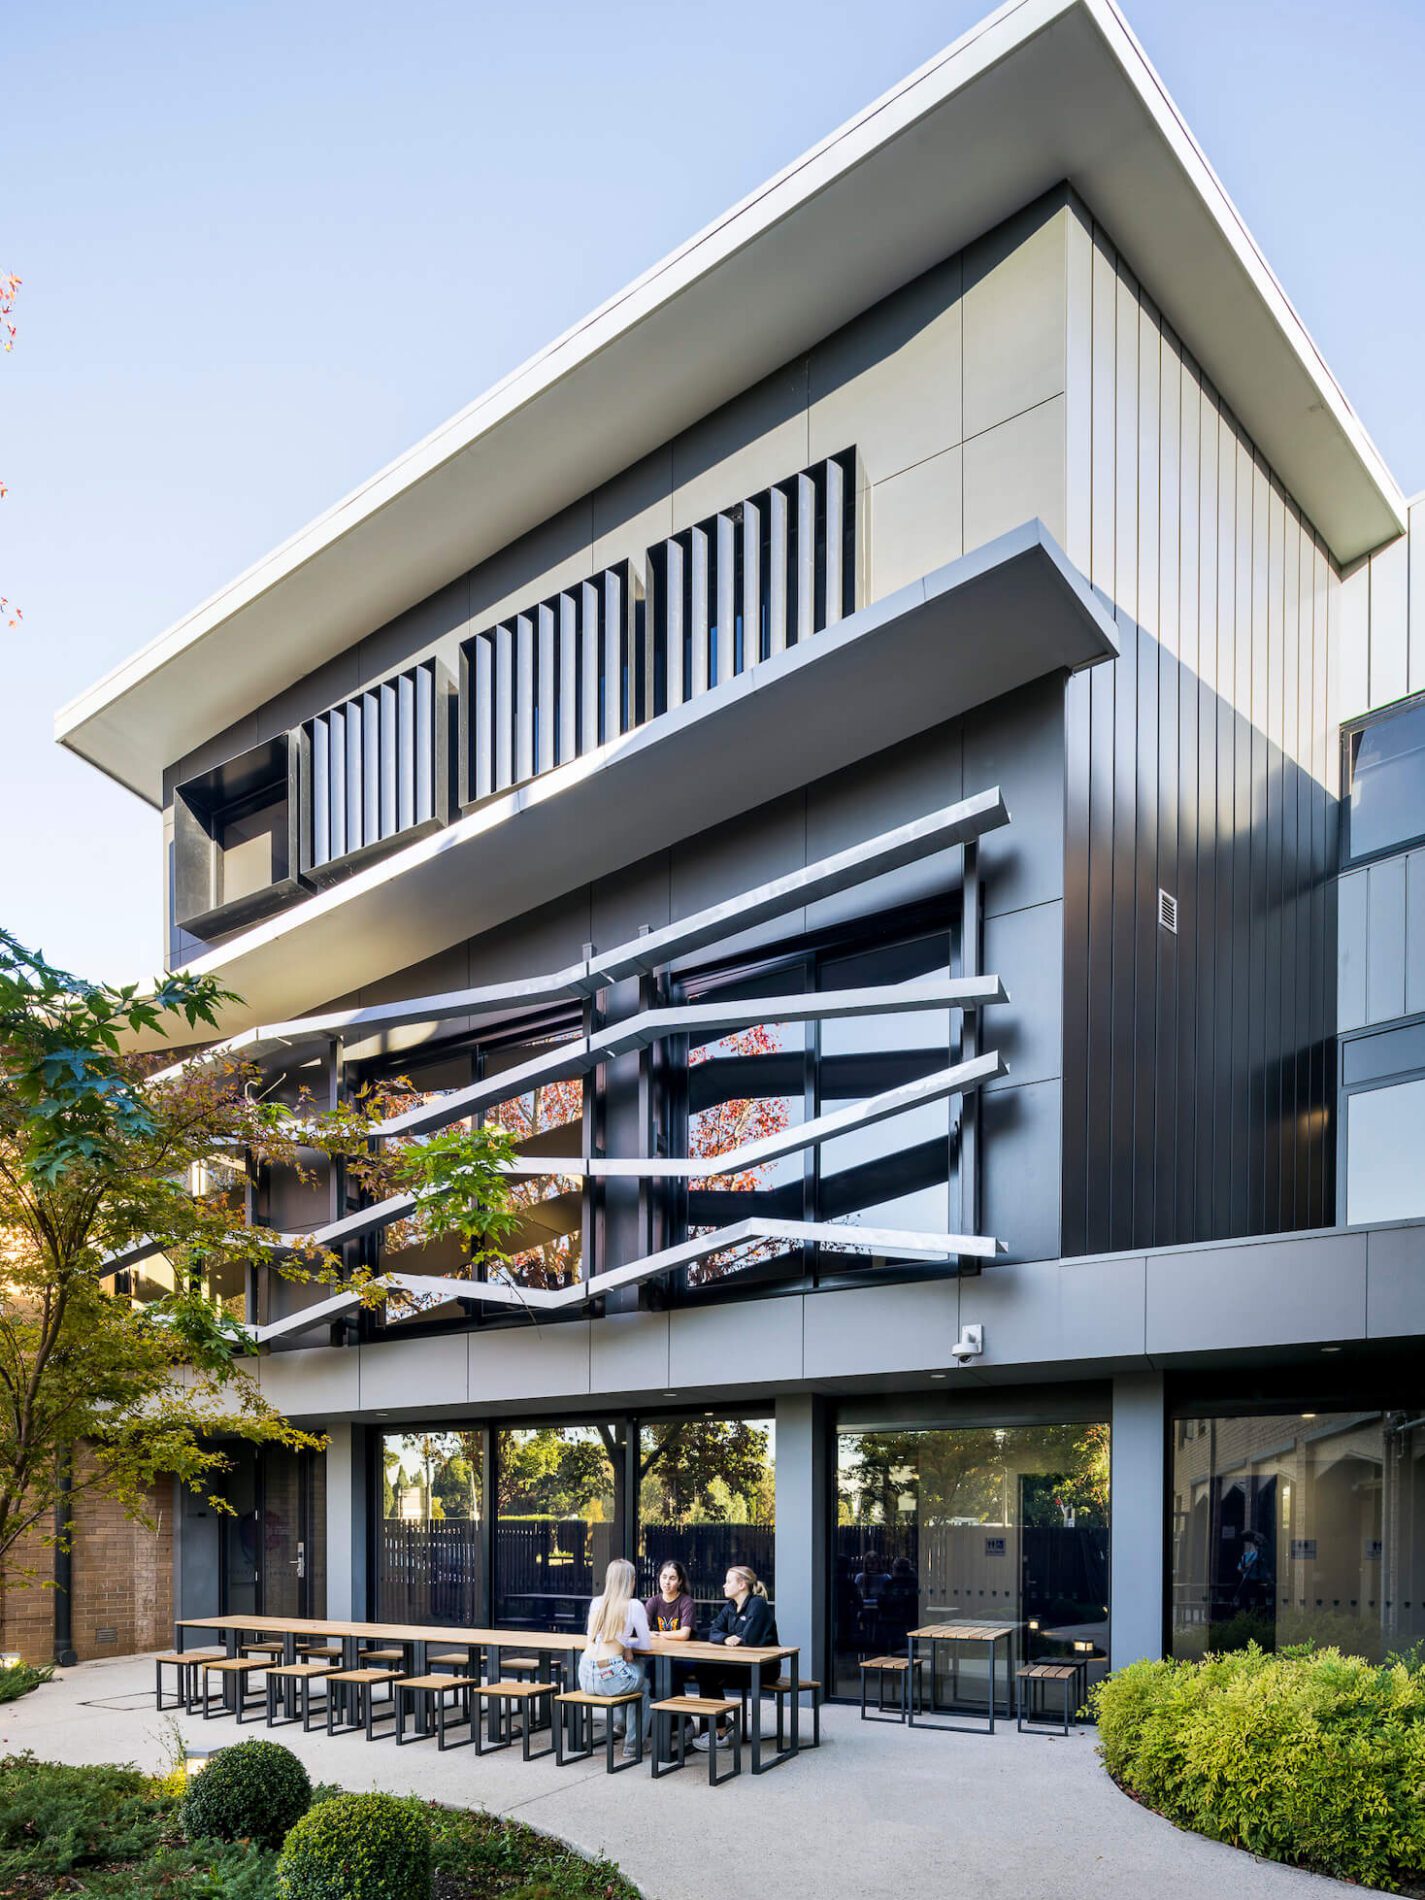 Contemporary building with window barrier feature, landscaping and outdoor dining tables and chairs below